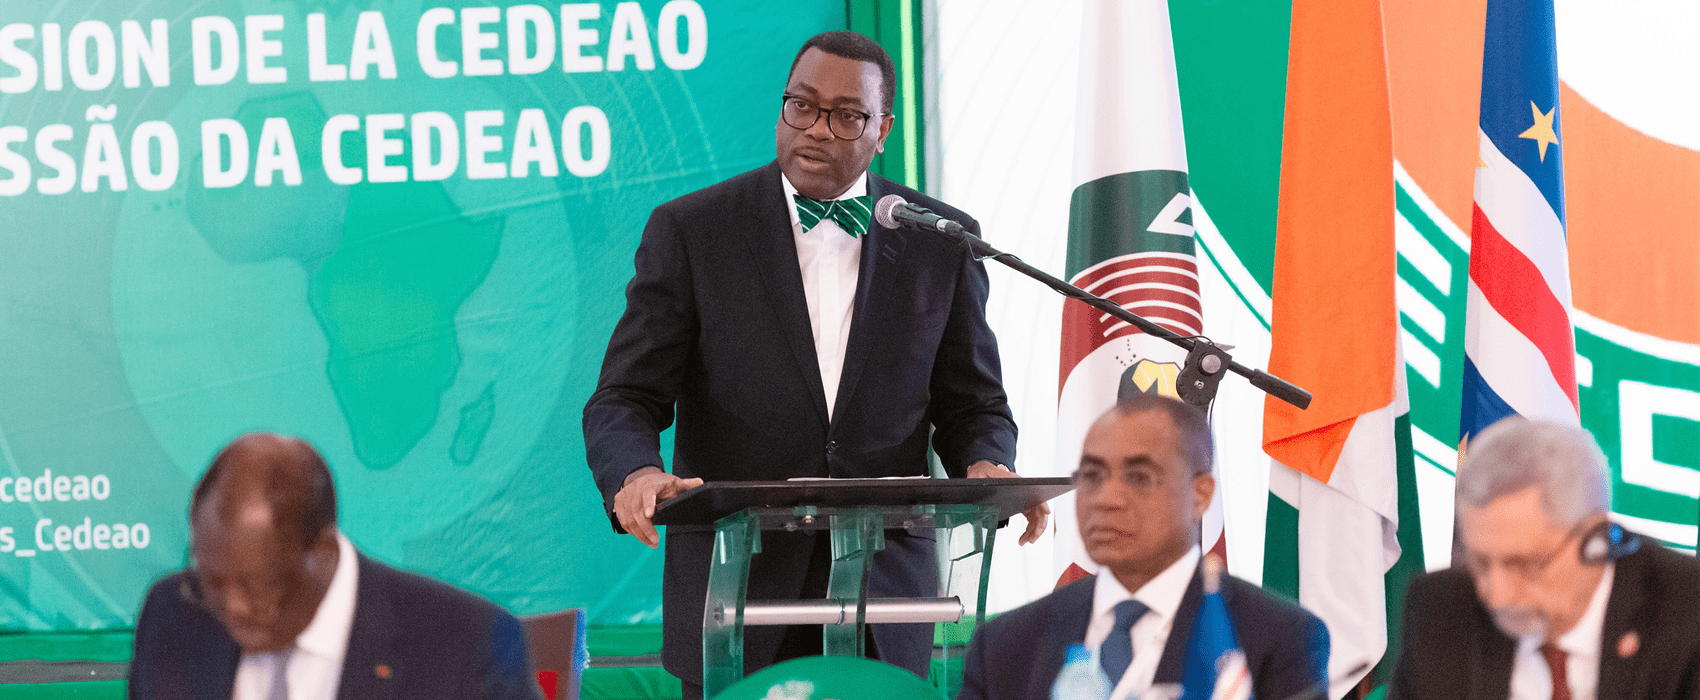 In recognition of the sterling performance of Dr. Akinwumi Adesina during his first term of office as President of the African Development Bank, the Authority endorses his candidacy for a second term as the President of the bank,” ECOWAS said in a communique issued after the meeting